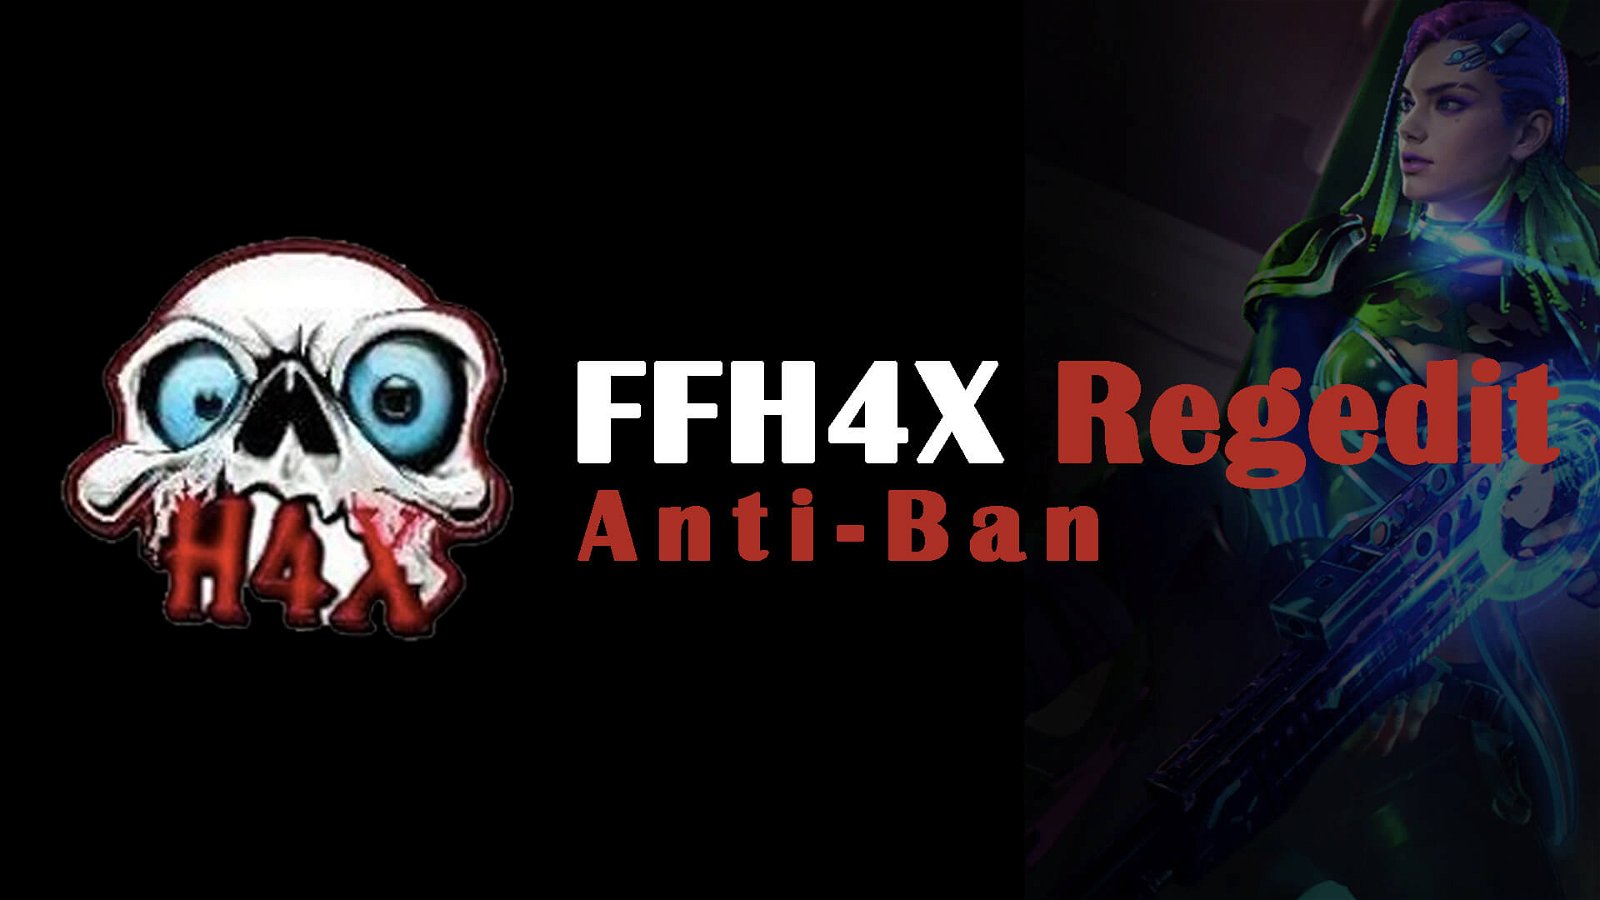 Download FFH4X Regedit Apk v119 For Android (Latest)